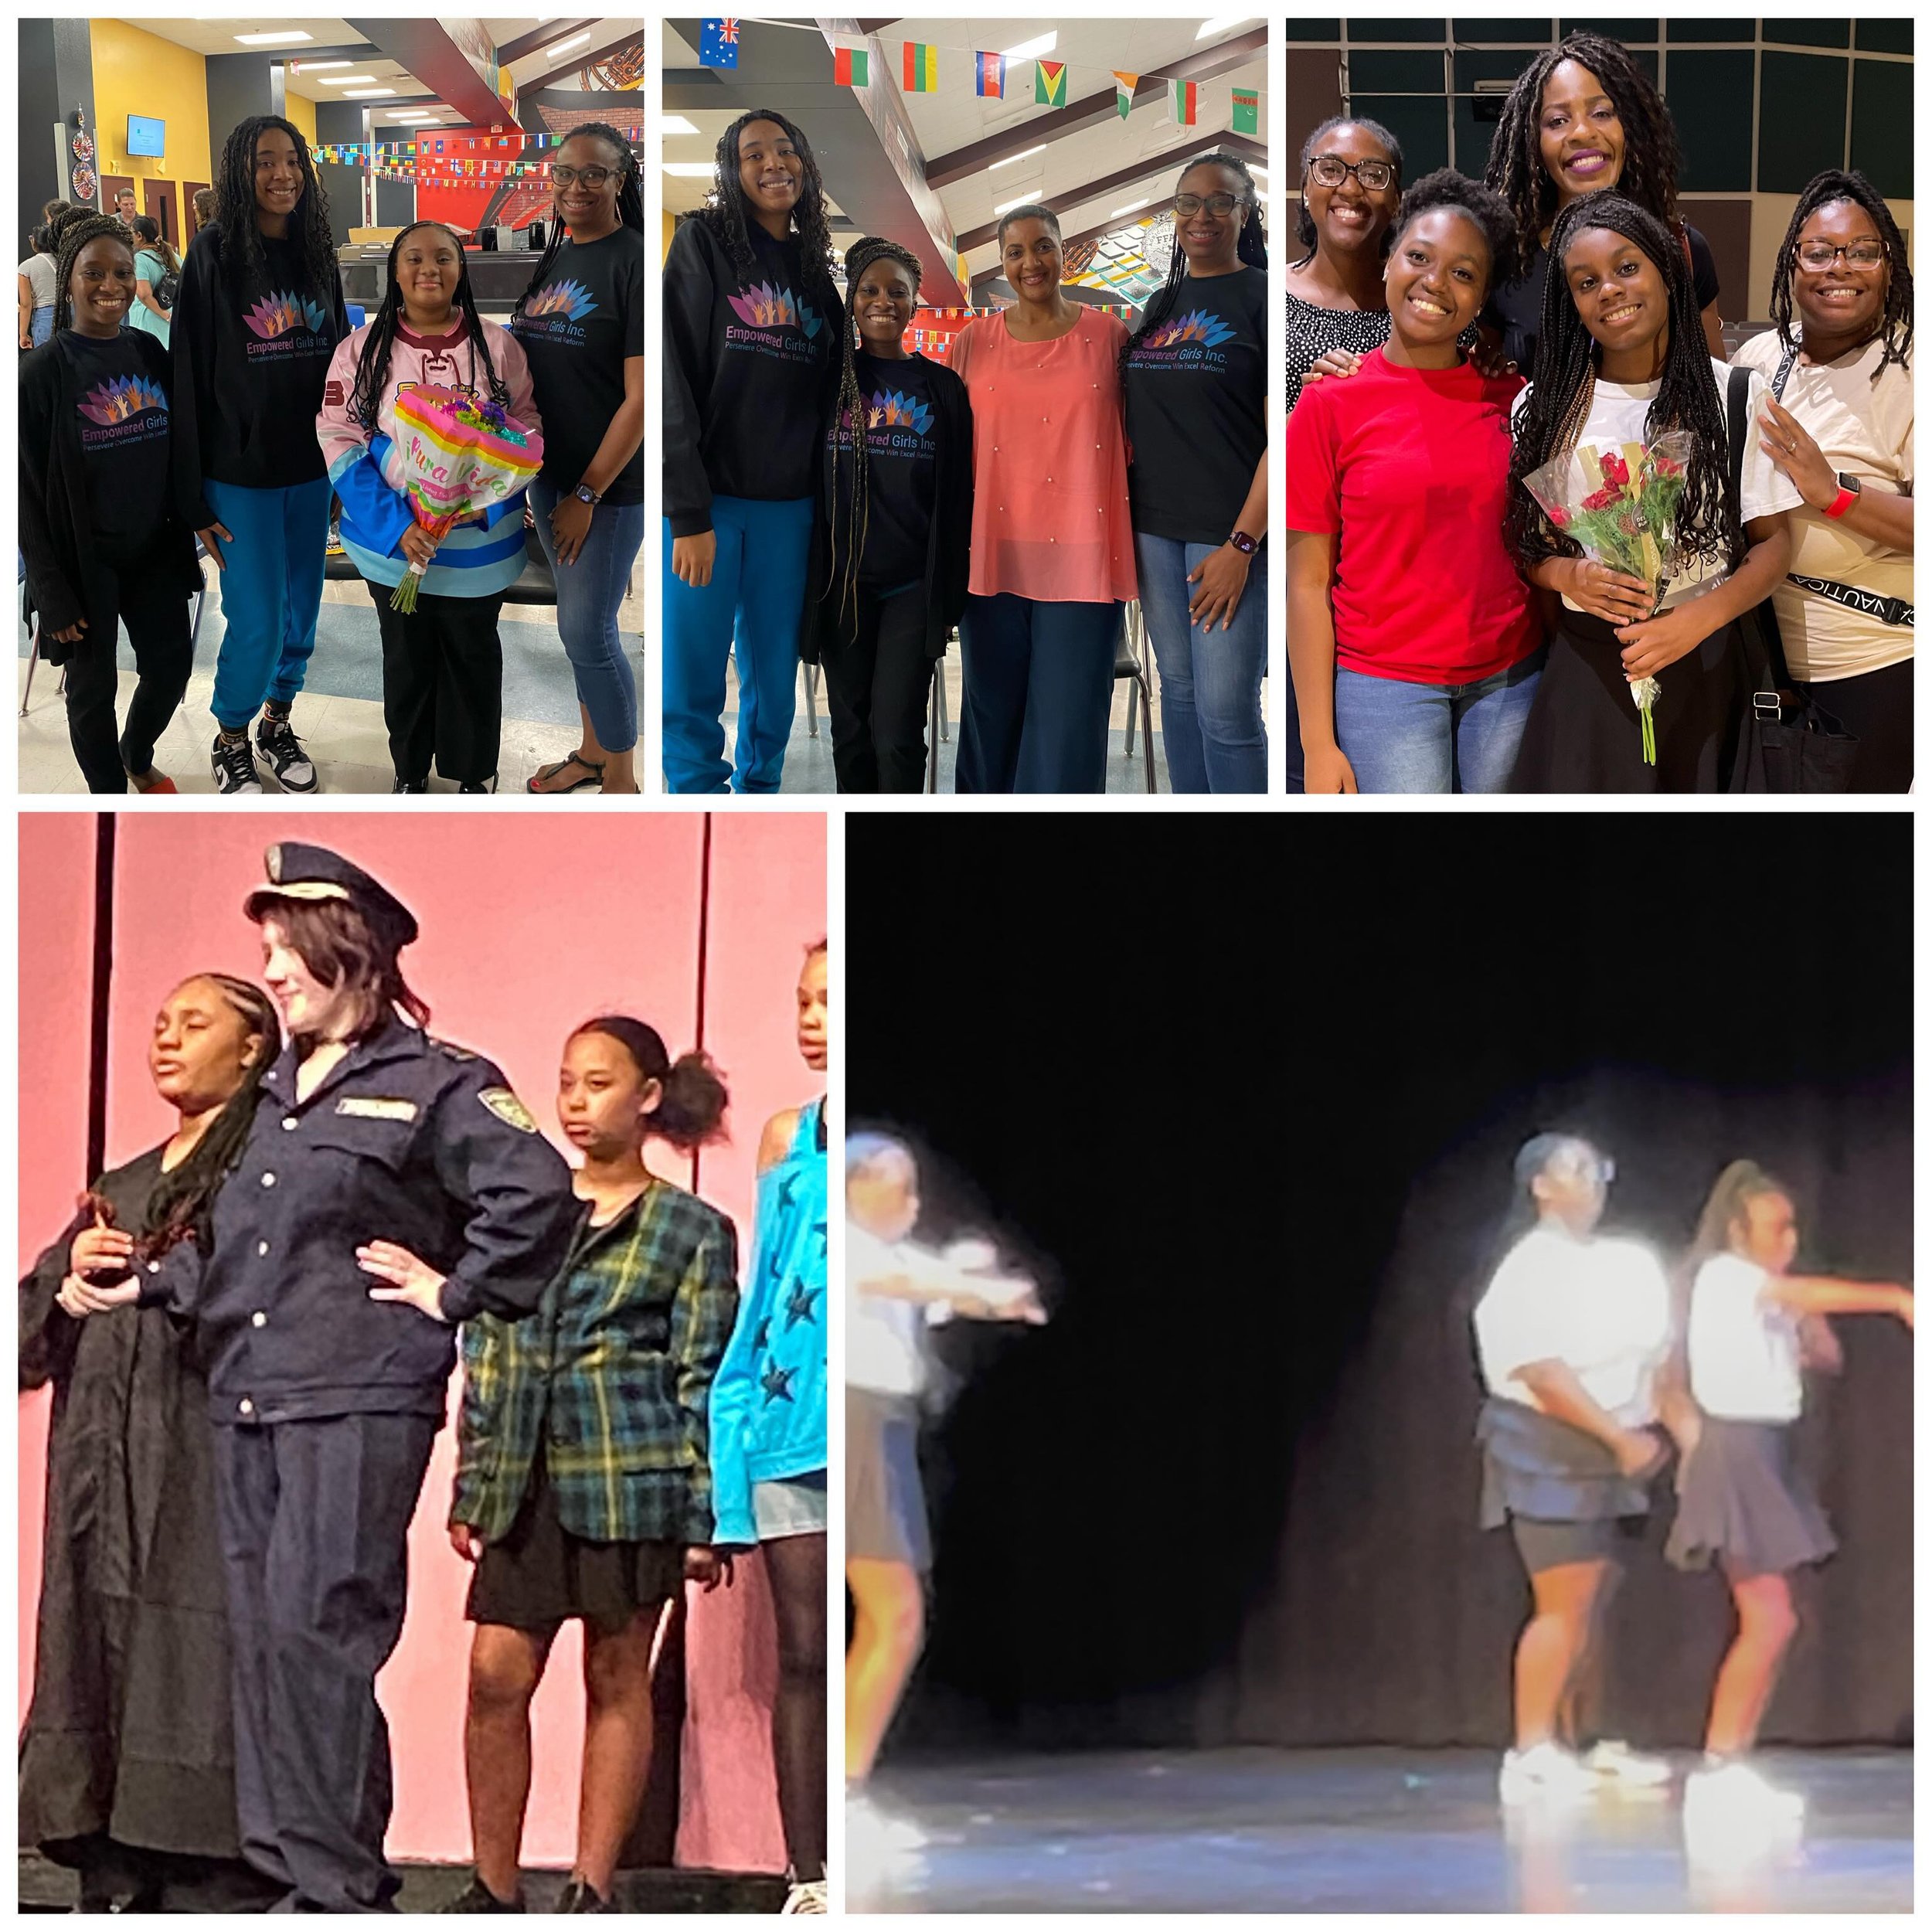 🎥 Lights, Camera, Action!

On Friday, April 19th two of our exceptional young ladies was on stage showing off their talents.  Gabrielle Starkes, exceptional student at Ocoee Middle School, performed in the school musical, Legally Blonde Jr. and  Dia